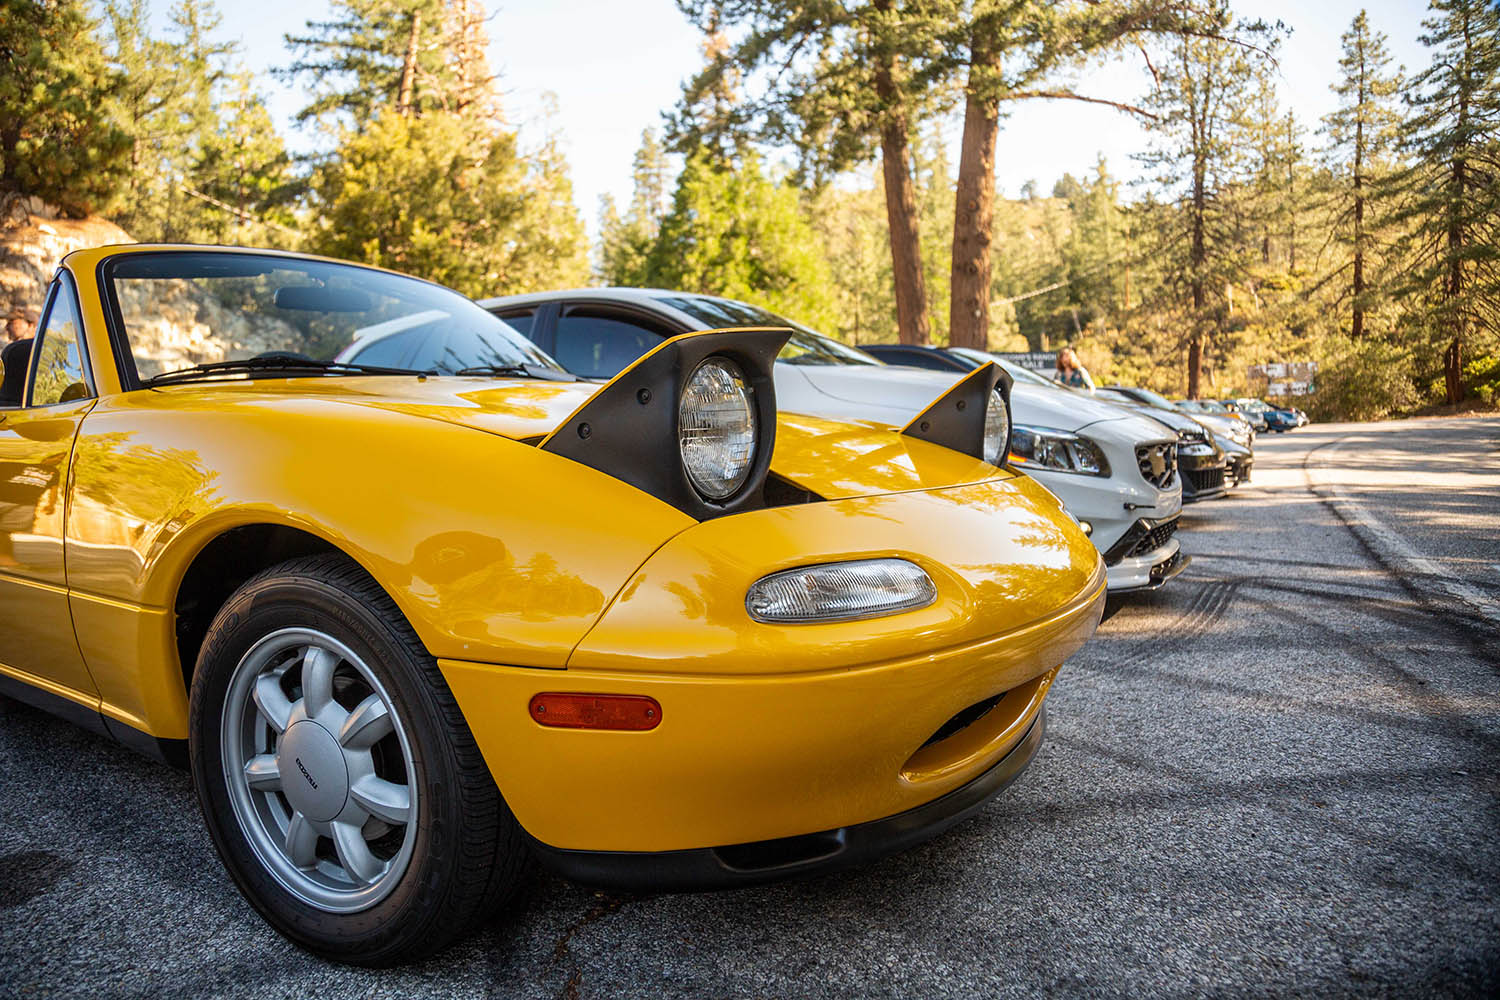 First-generation (NA) Mazda MX-5 Miata in yellow, front-nose view with popup headlights exposed, photographed at Good Vibes Breakfast Club at Newcomb's Ranch on Angeles Crest Highway in Southern California.